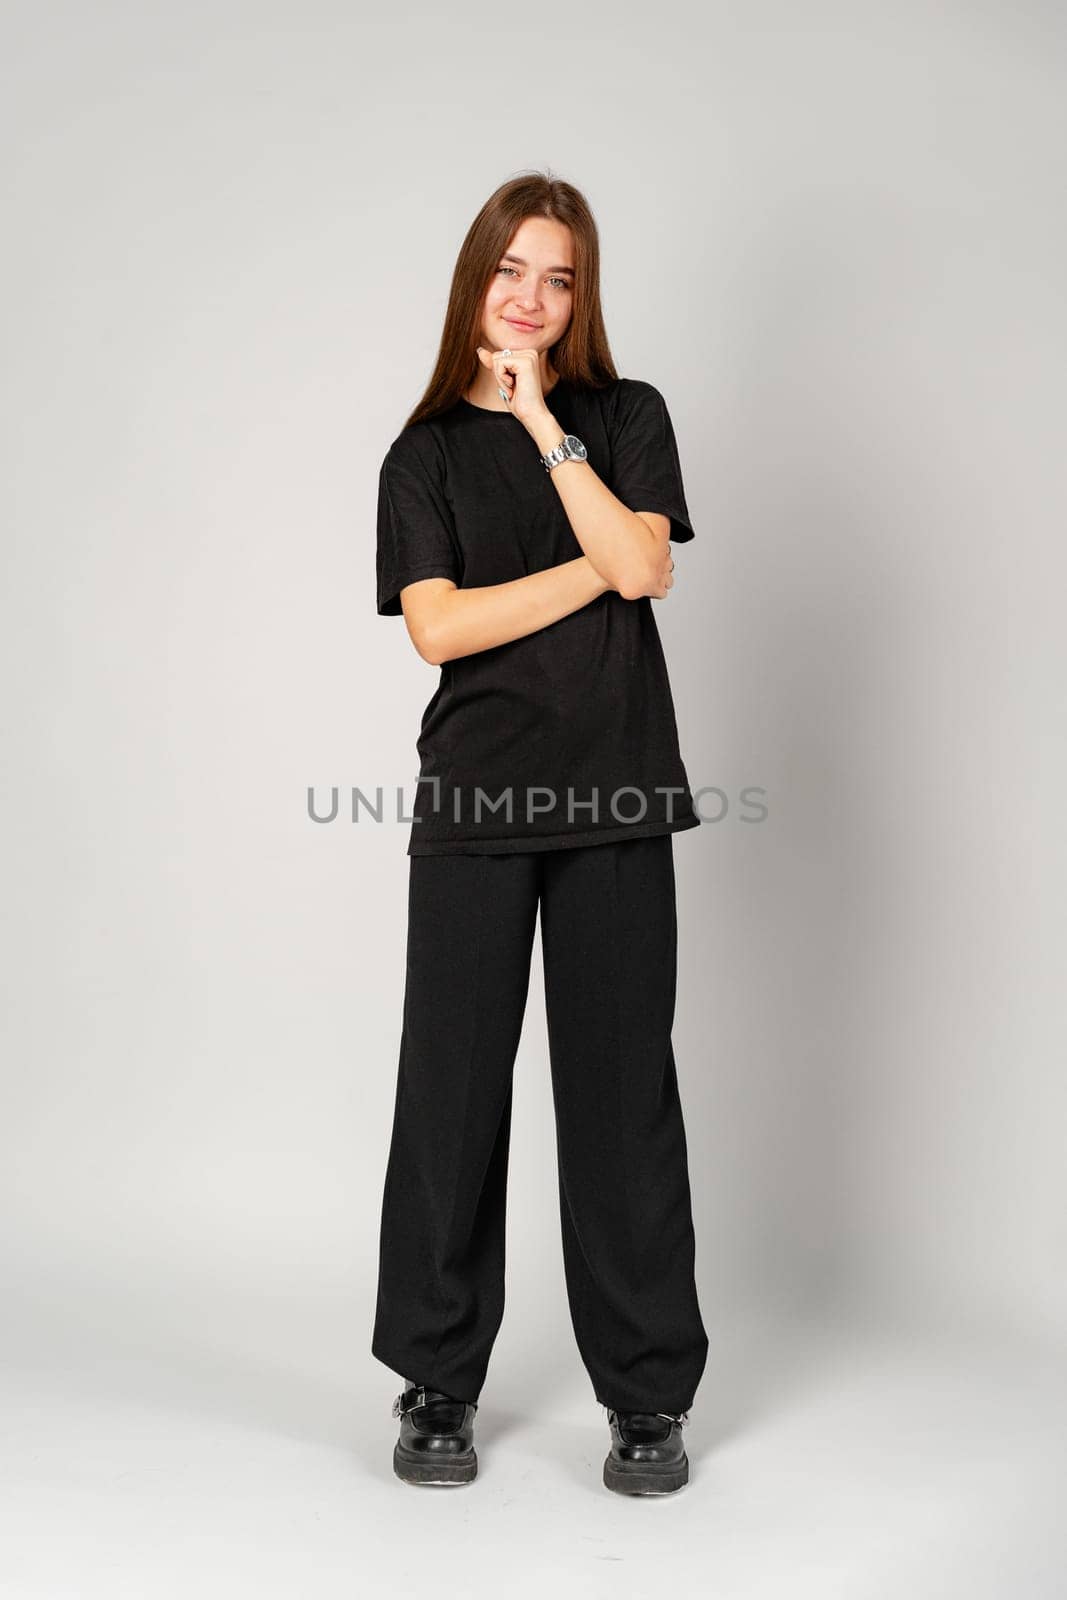 Woman Standing in Black Shirt and Pants on gray background in studio